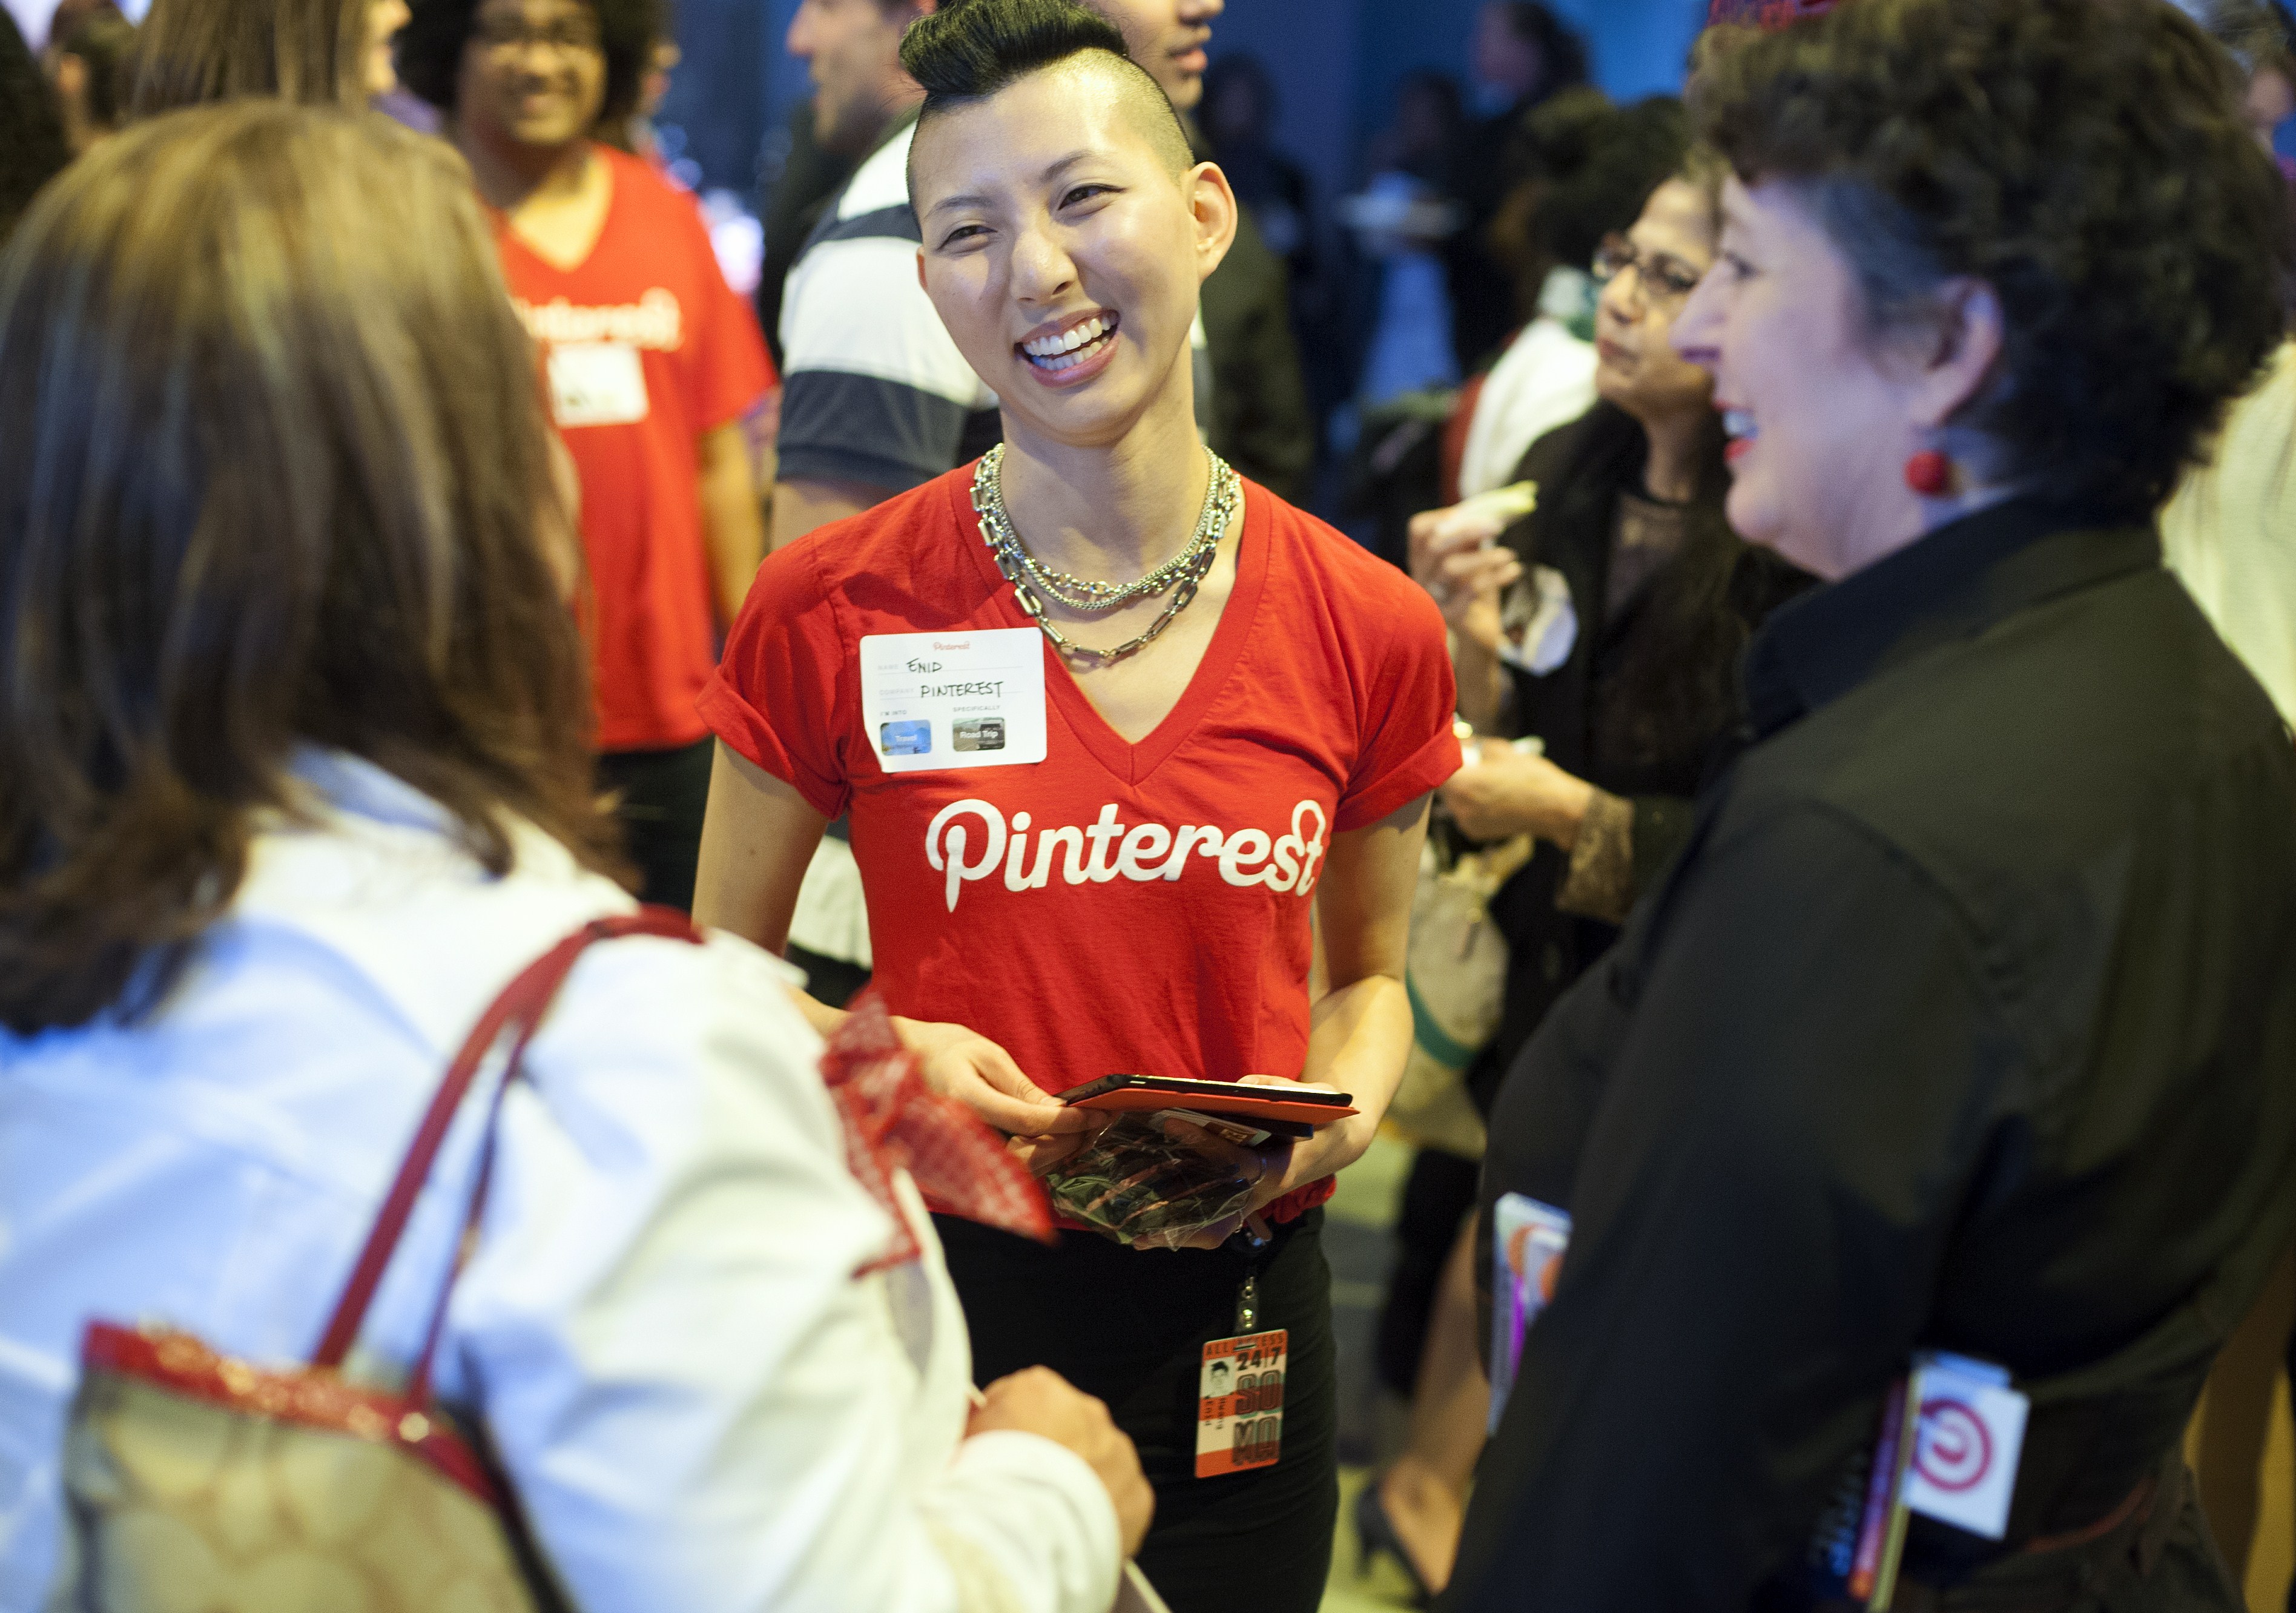 A Pinterest employee in a red Pinterest shirt welcomes guests to the company headquarters for an event.